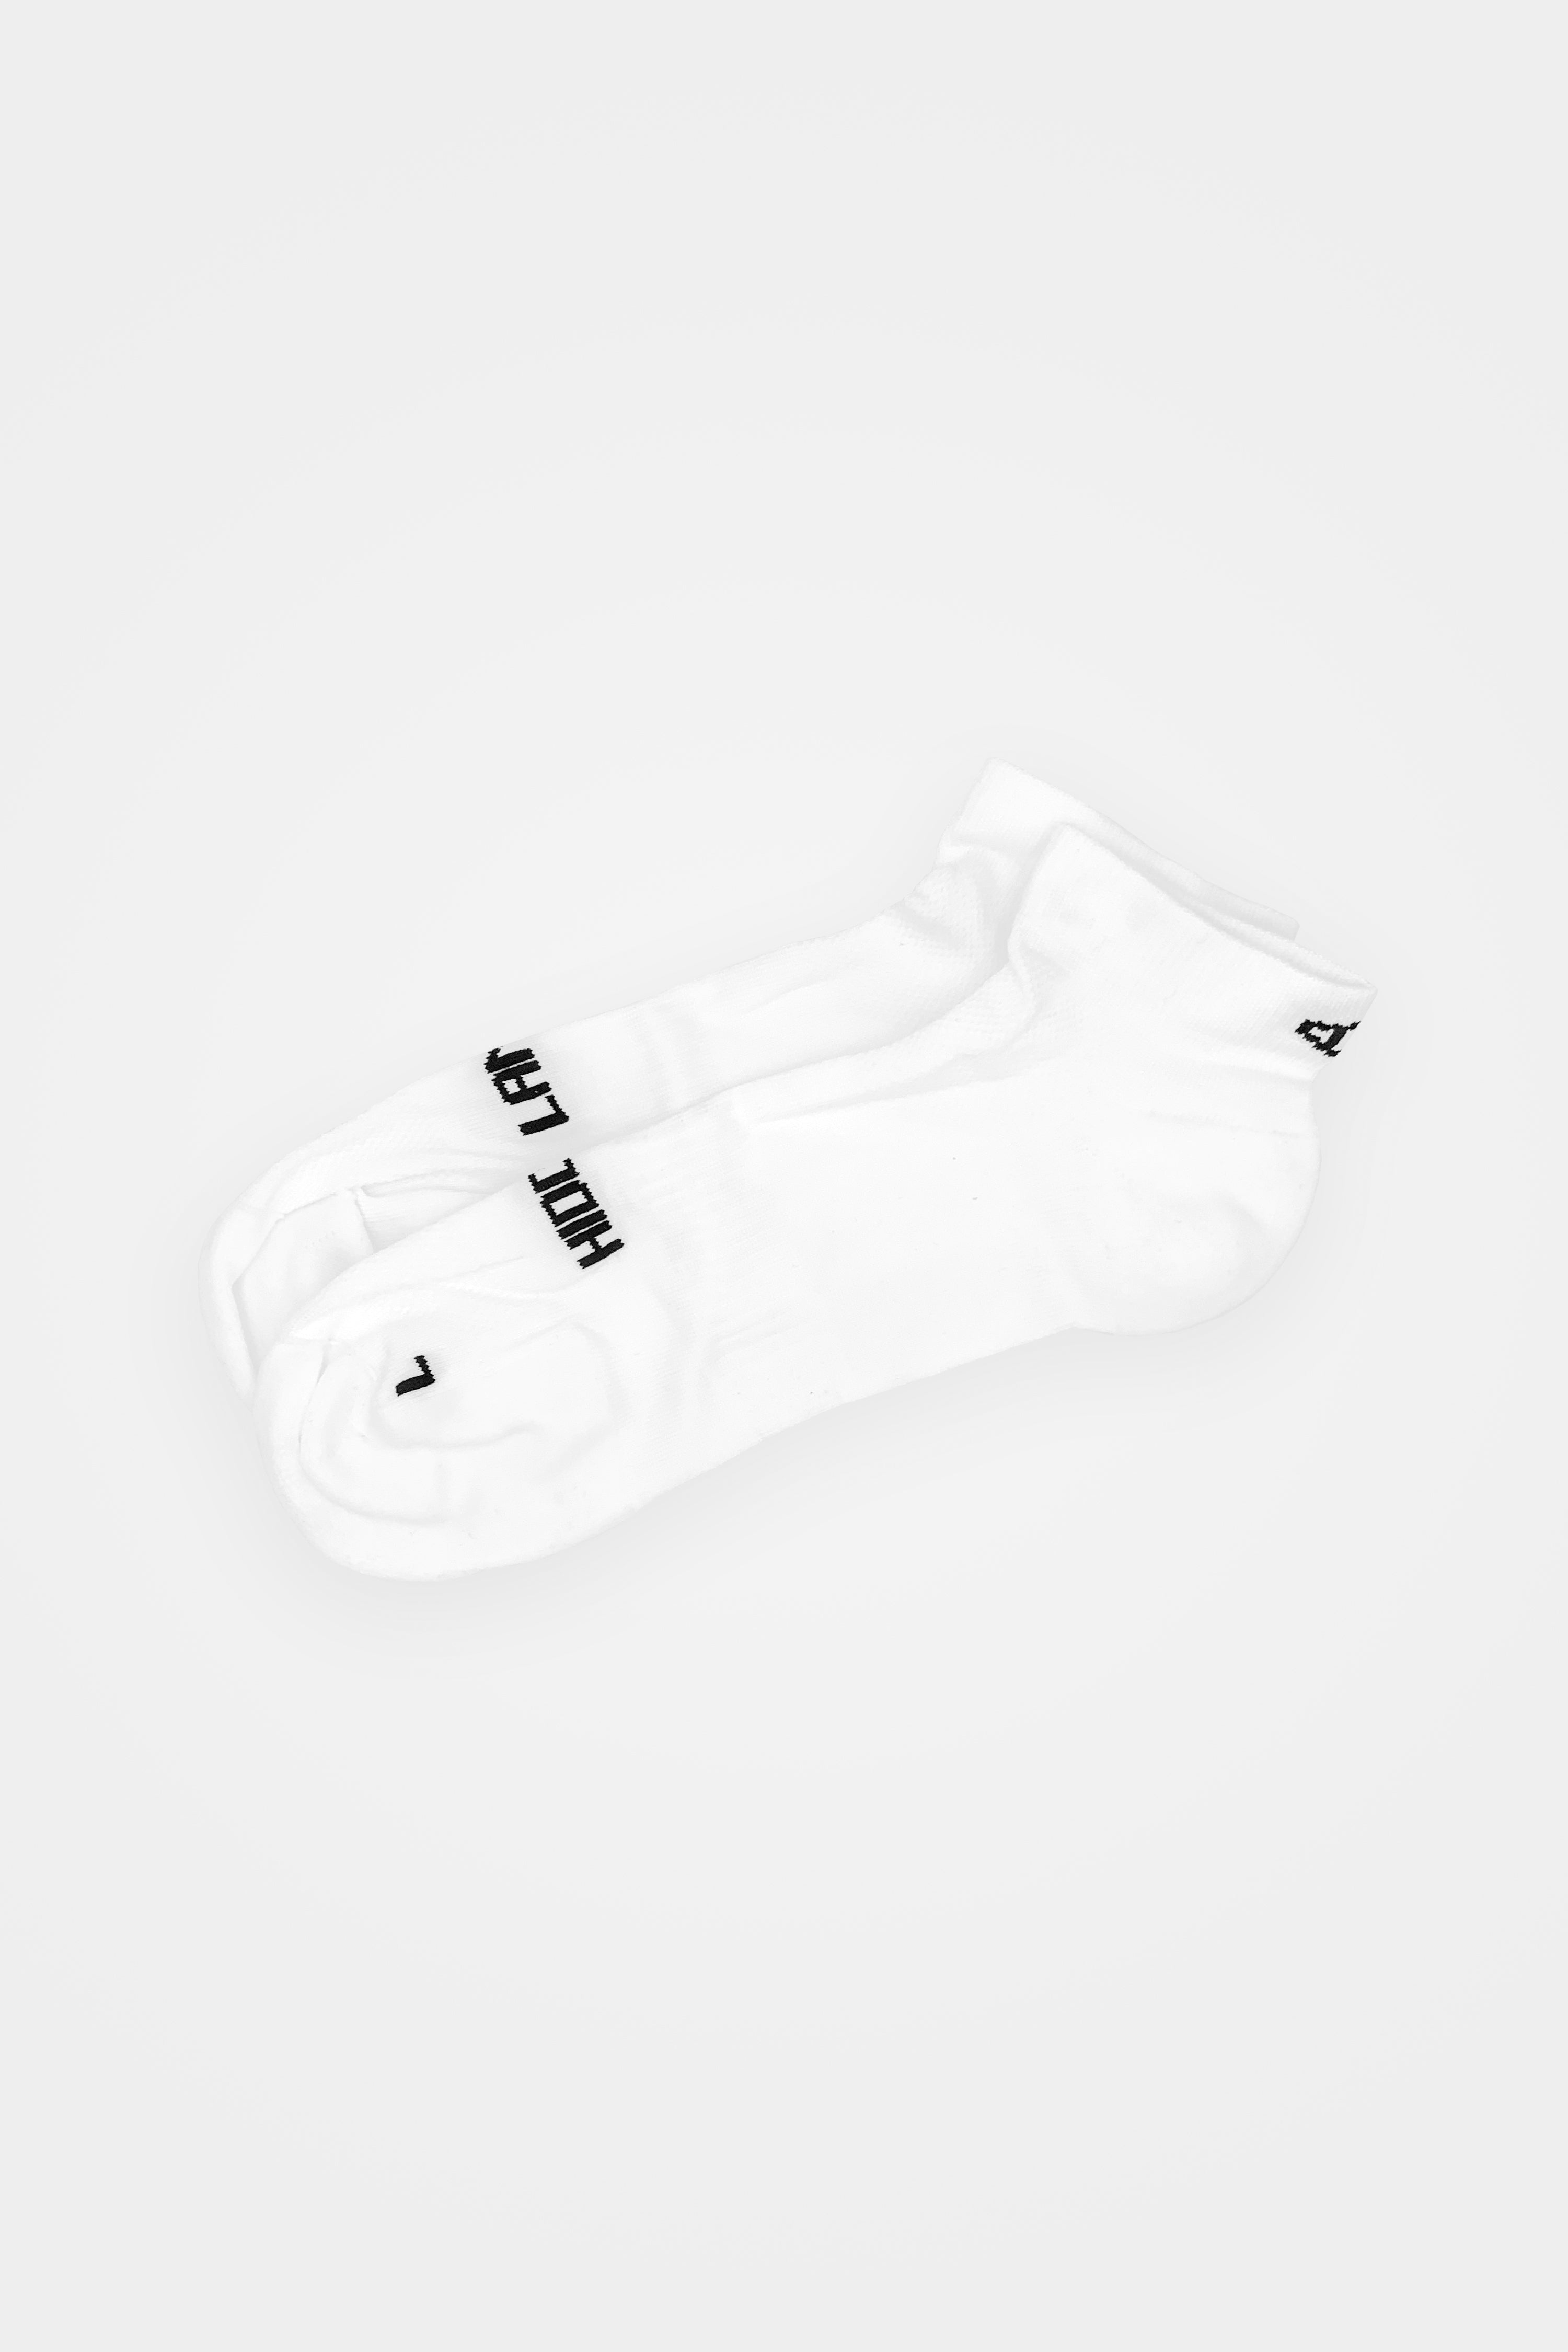 Product photo of Performance Socks LOW White